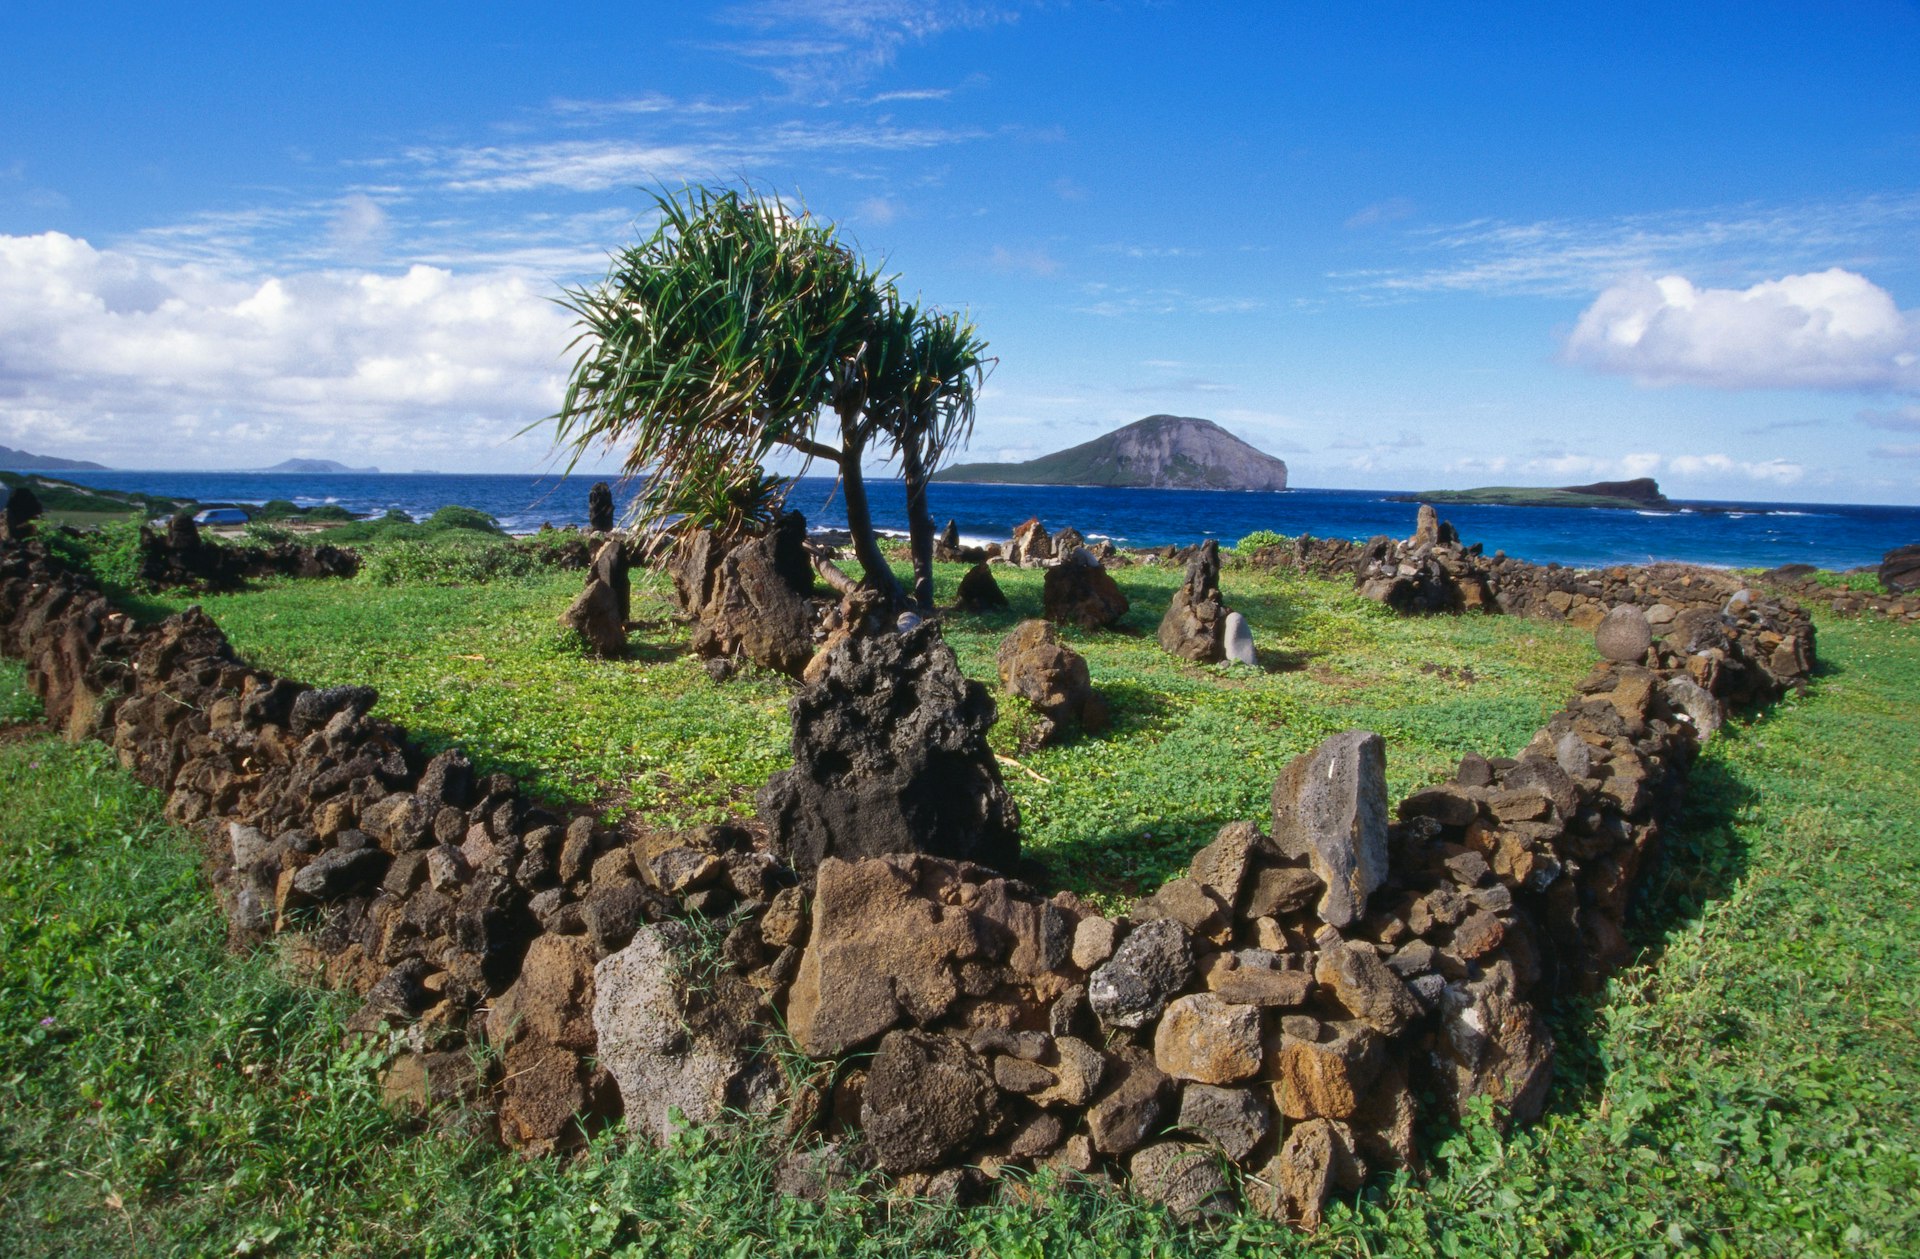 The ruins of an ancient <em>heiau</em> at Kaupo Beach on O‘ahu. Image by Karl Lehmann / Lonely Planet Images / Getty